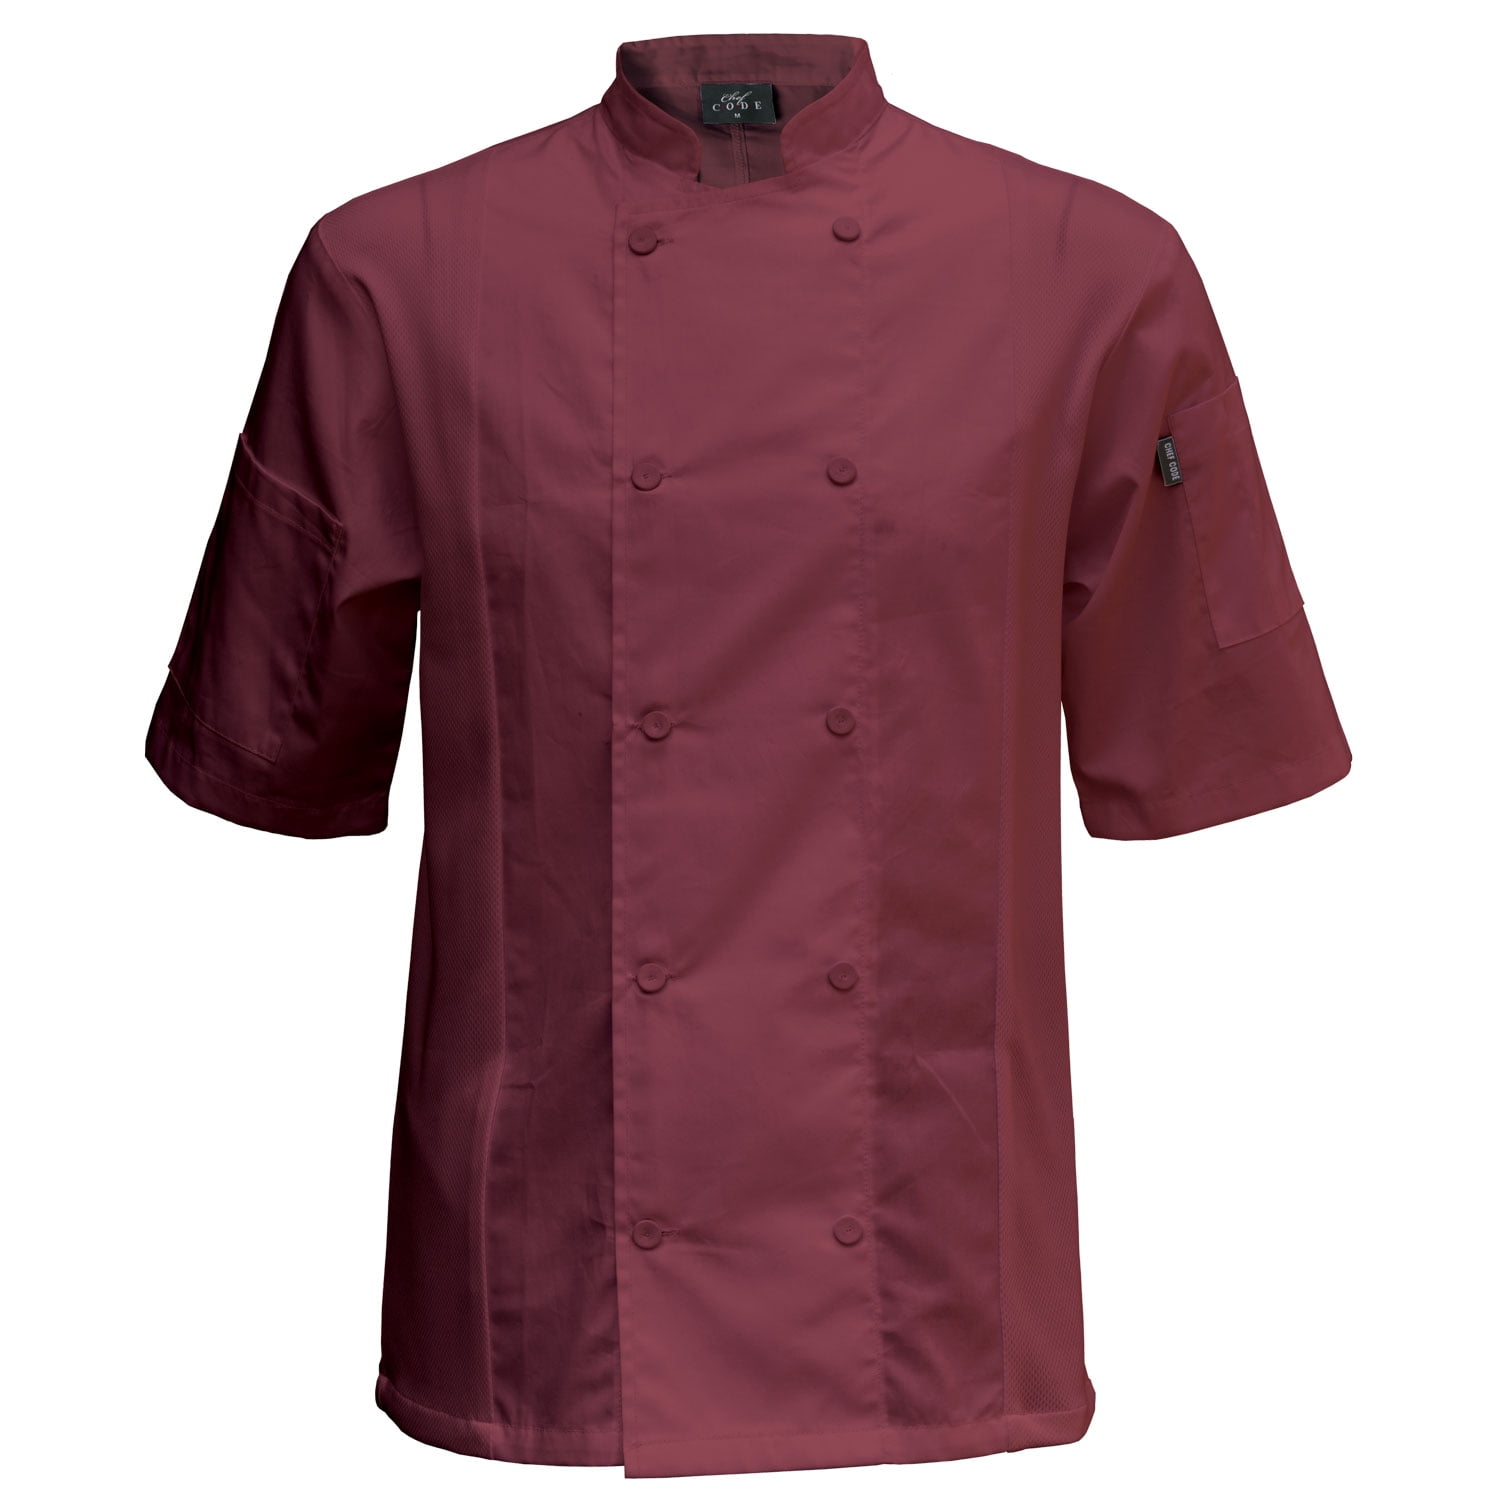 Chef jacket coat small medium large Xl 2x 3x 4x 5x red white brown cook NEW 